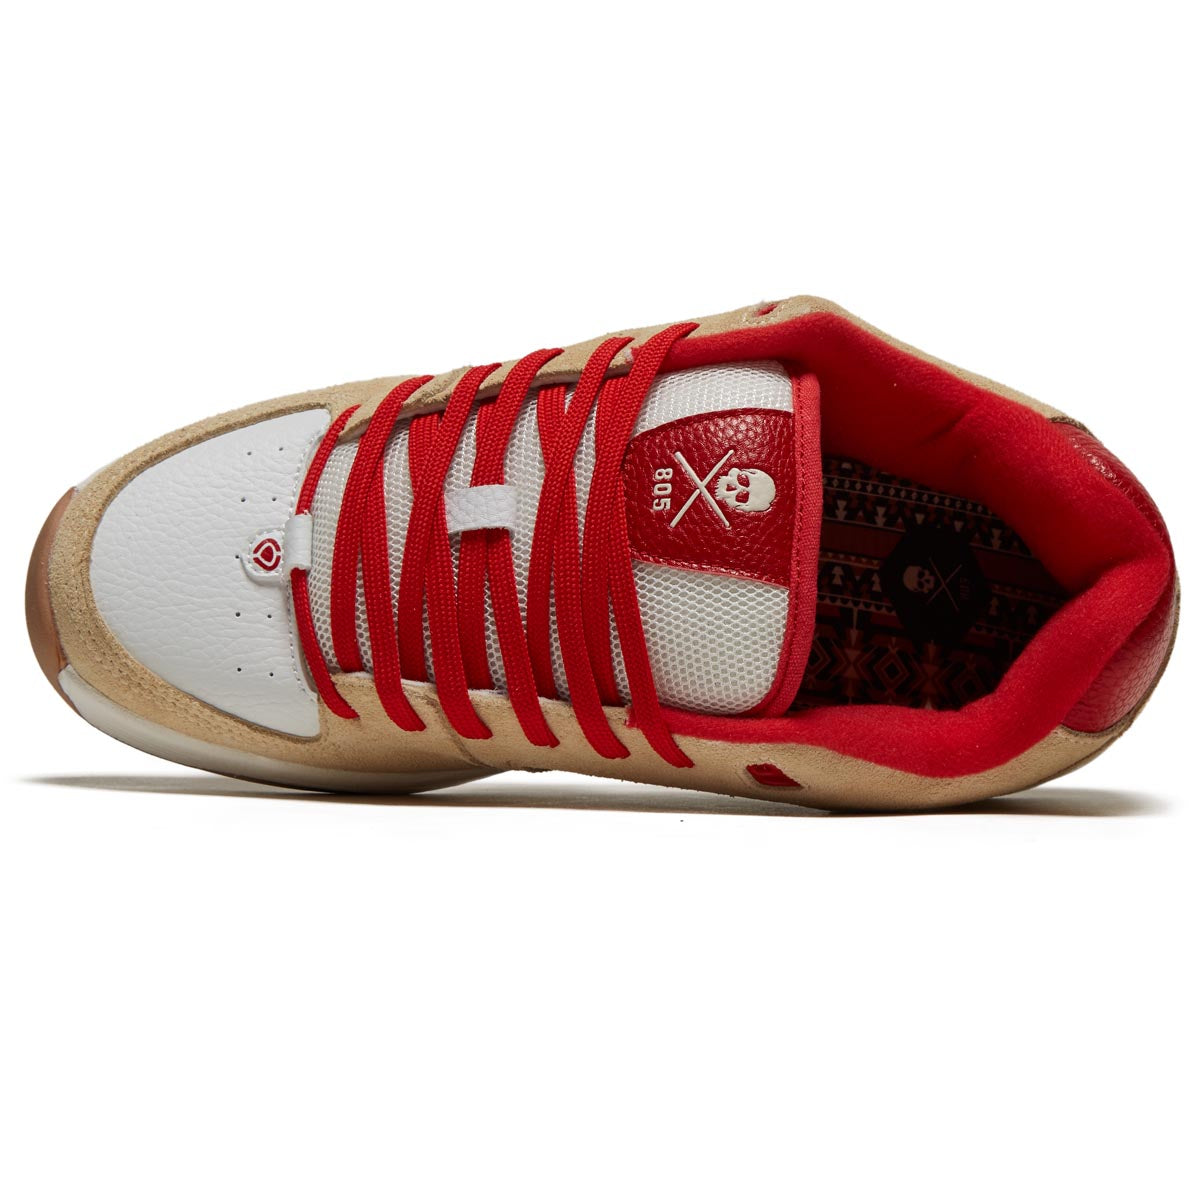 C1rca 805 Shoes - Navajo/White/Red image 3